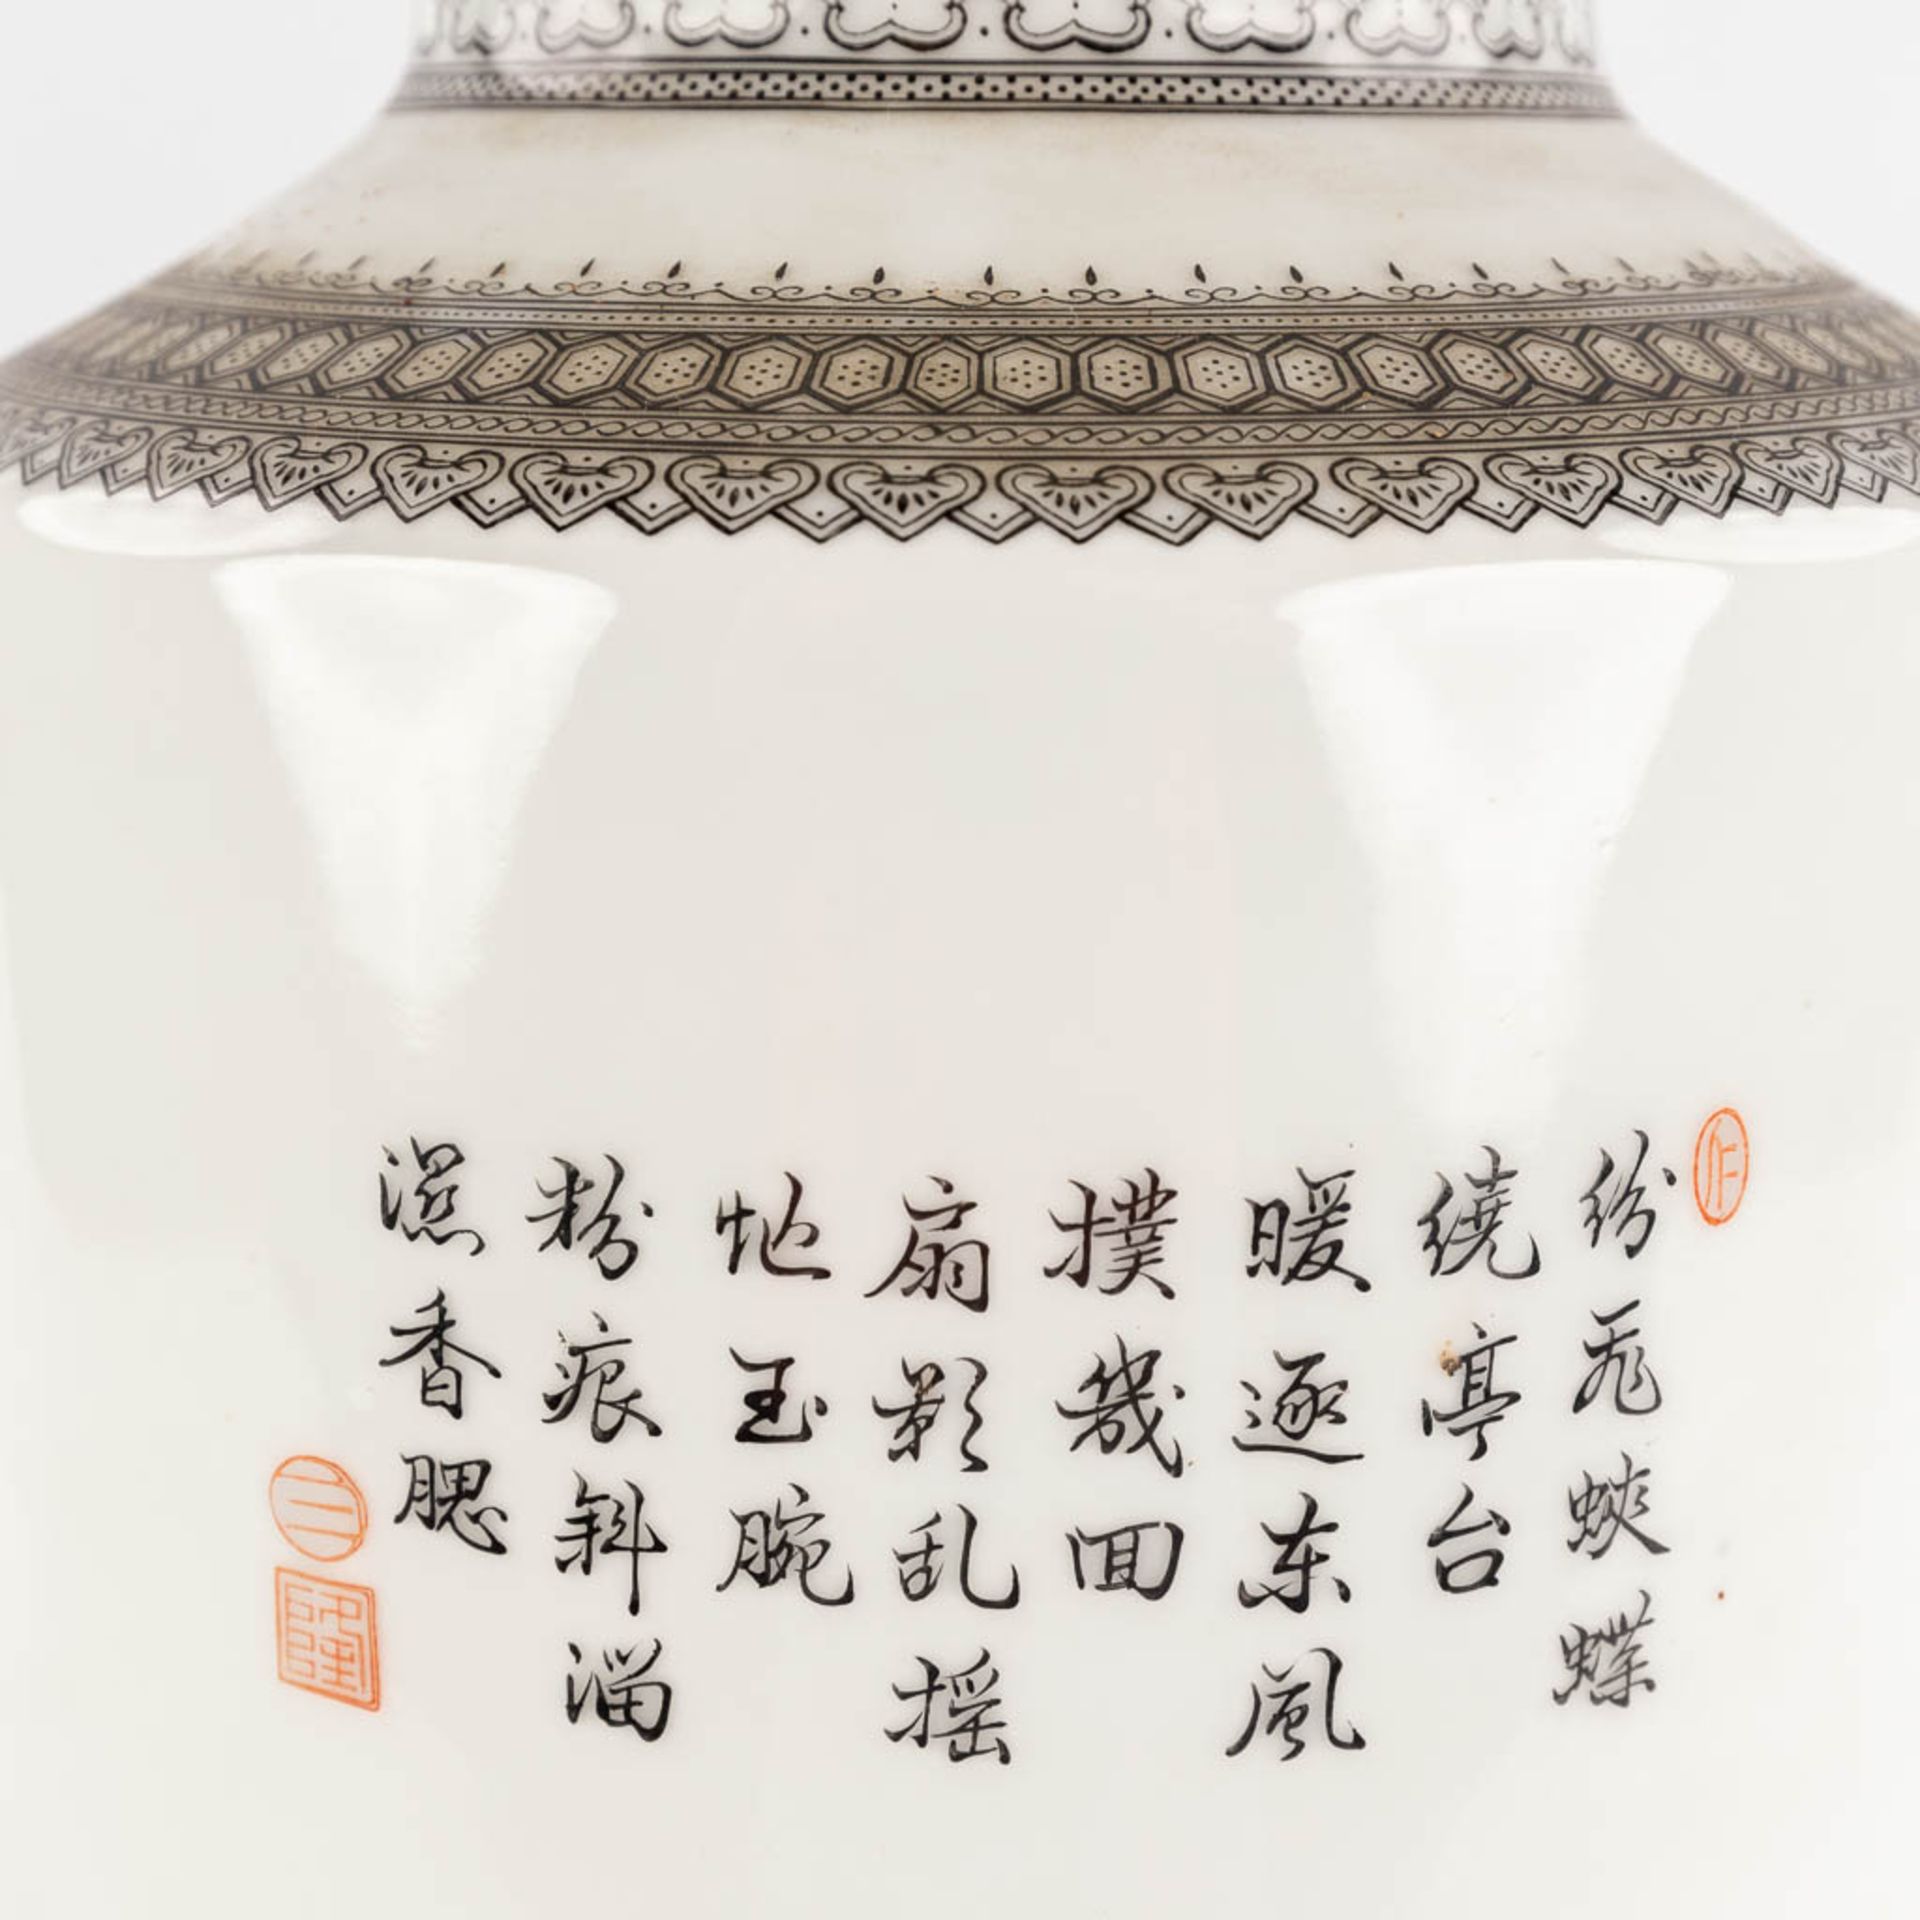 A Chinese vase decorated with a fine decor of ladies, 20th C. (H:45 x D:19 cm) - Image 13 of 13